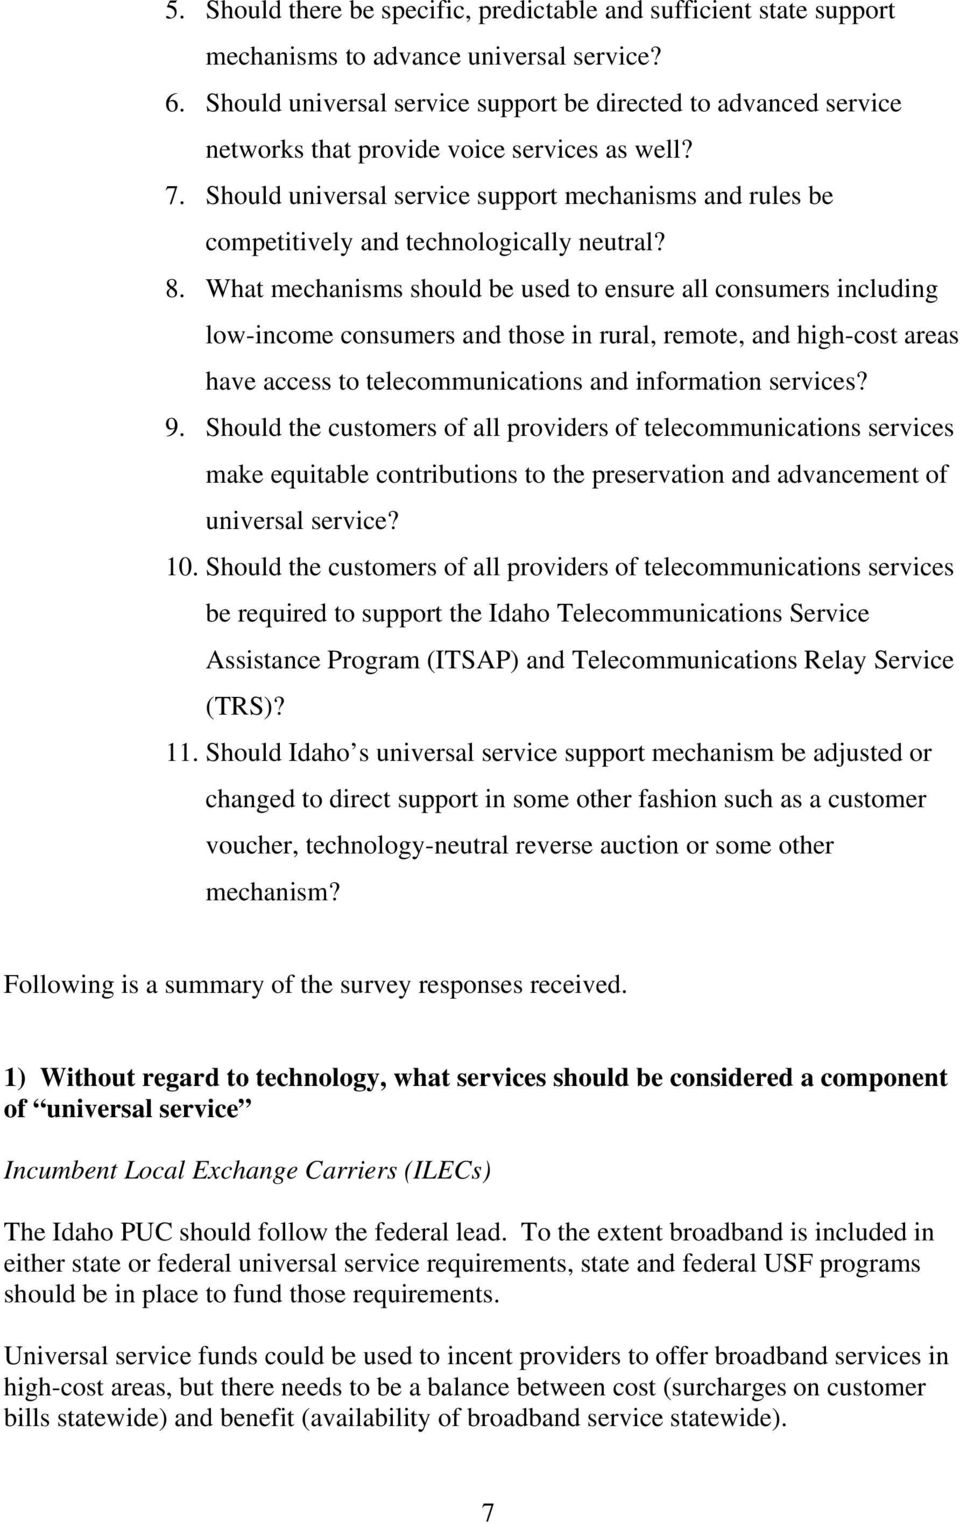 Should universal service support mechanisms and rules be competitively and technologically neutral? 8.